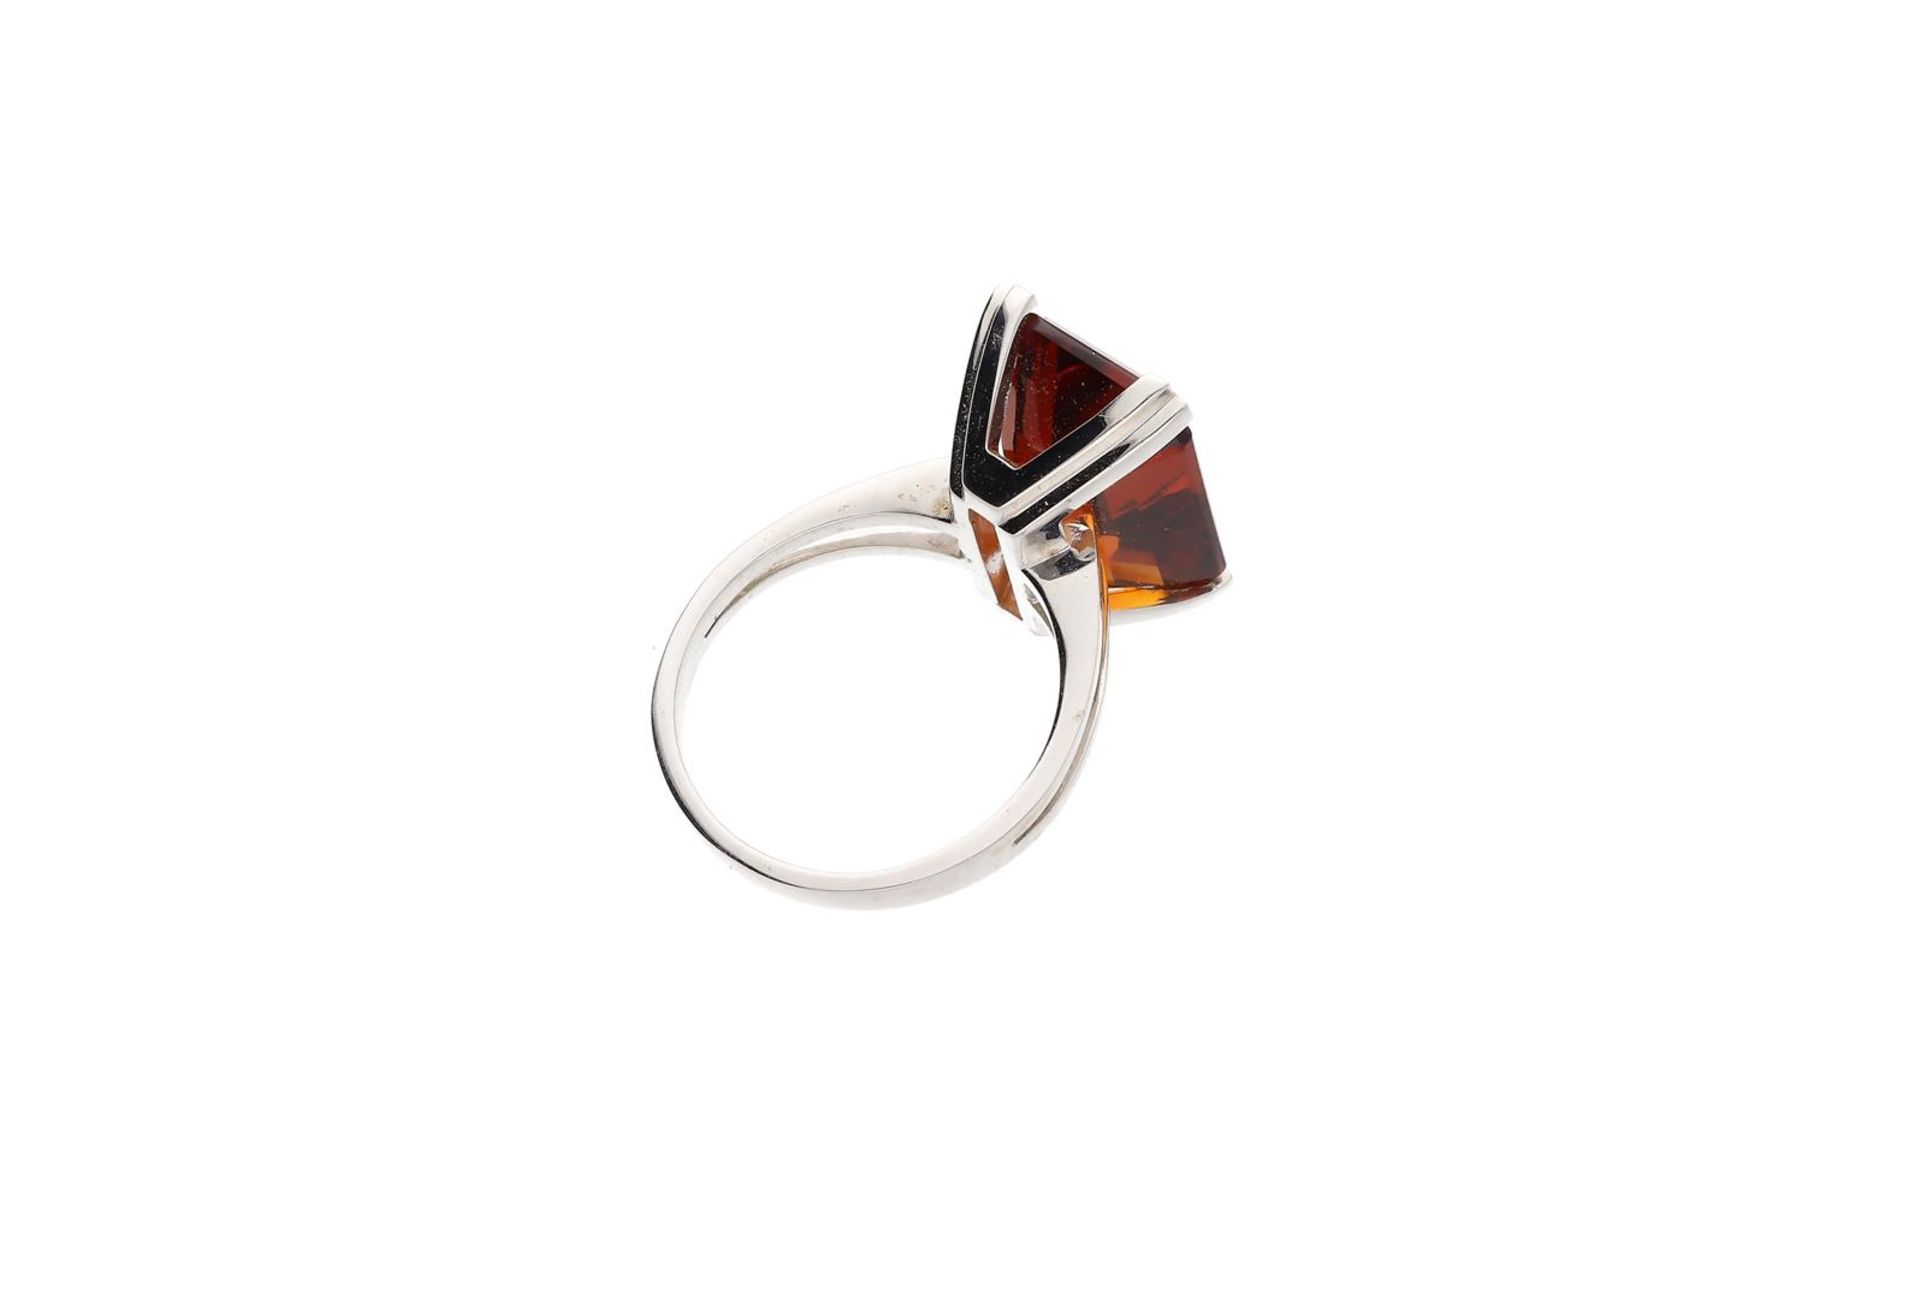 An 18-kt white gold ring set with an emerald cut orange citrin, approx. 10.16 ct. Size: Total weight - Image 2 of 3